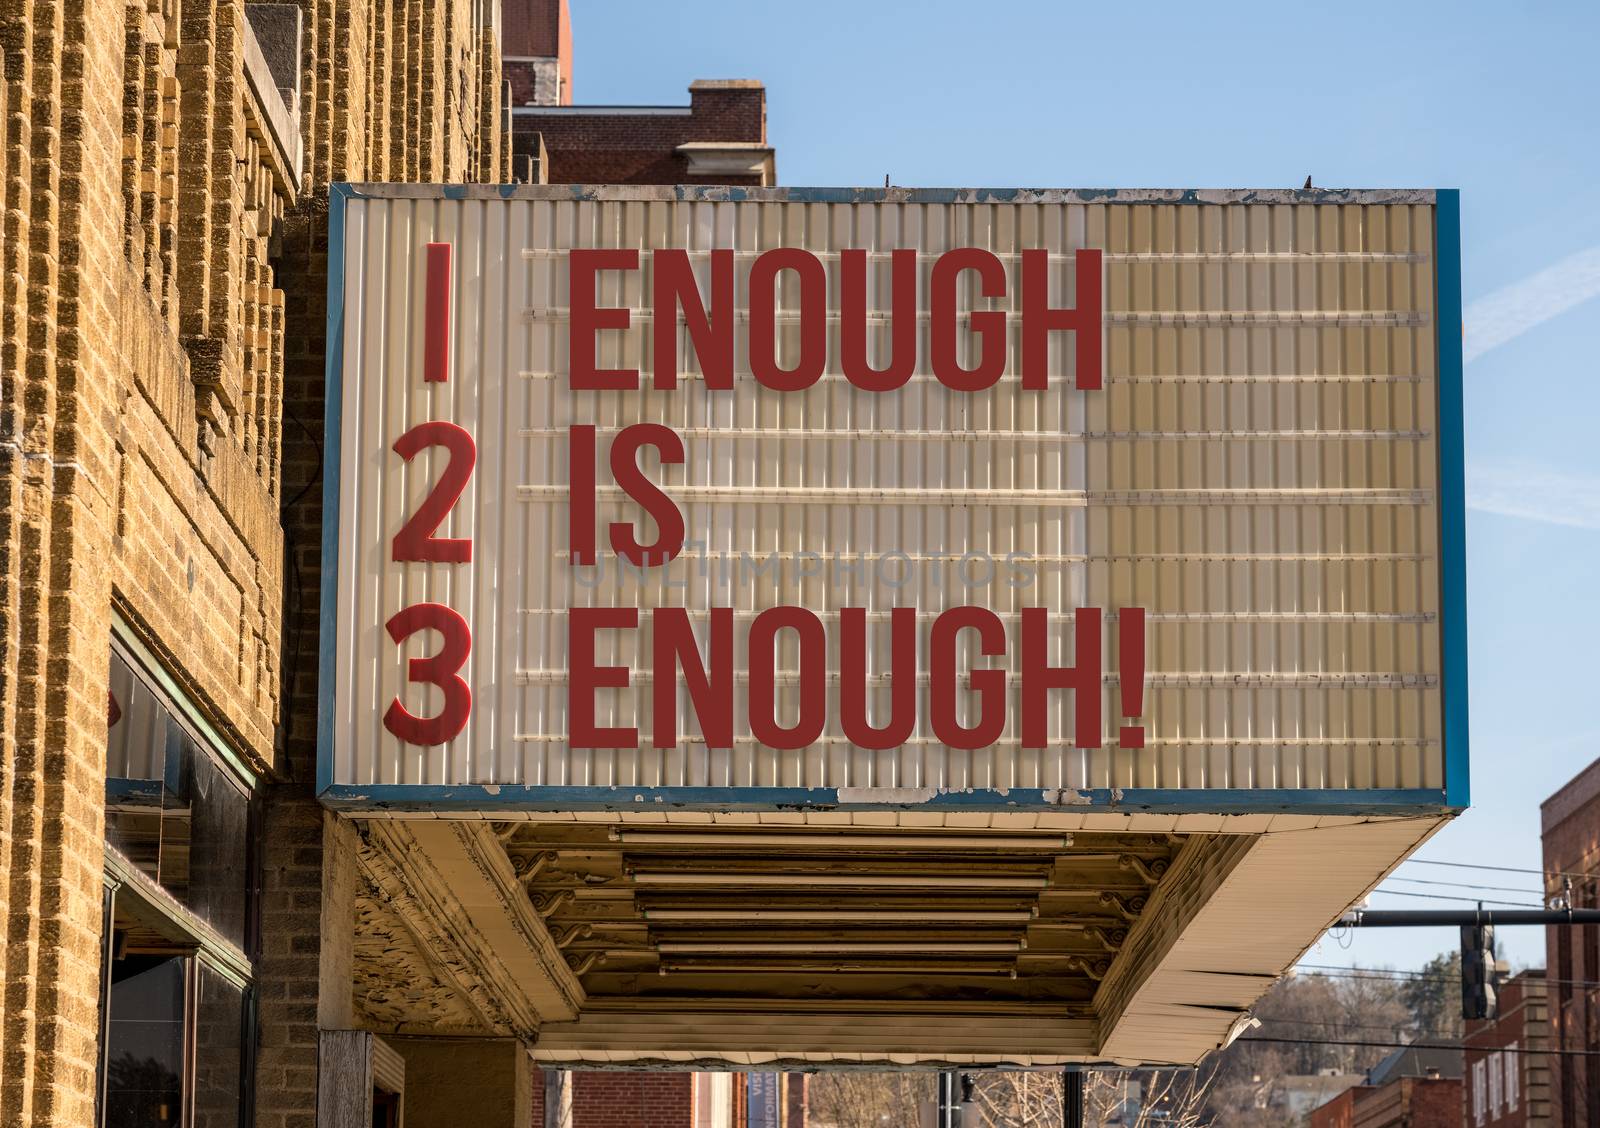 Mockup of movie cinema billboard with Enough is enough on the message board by steheap